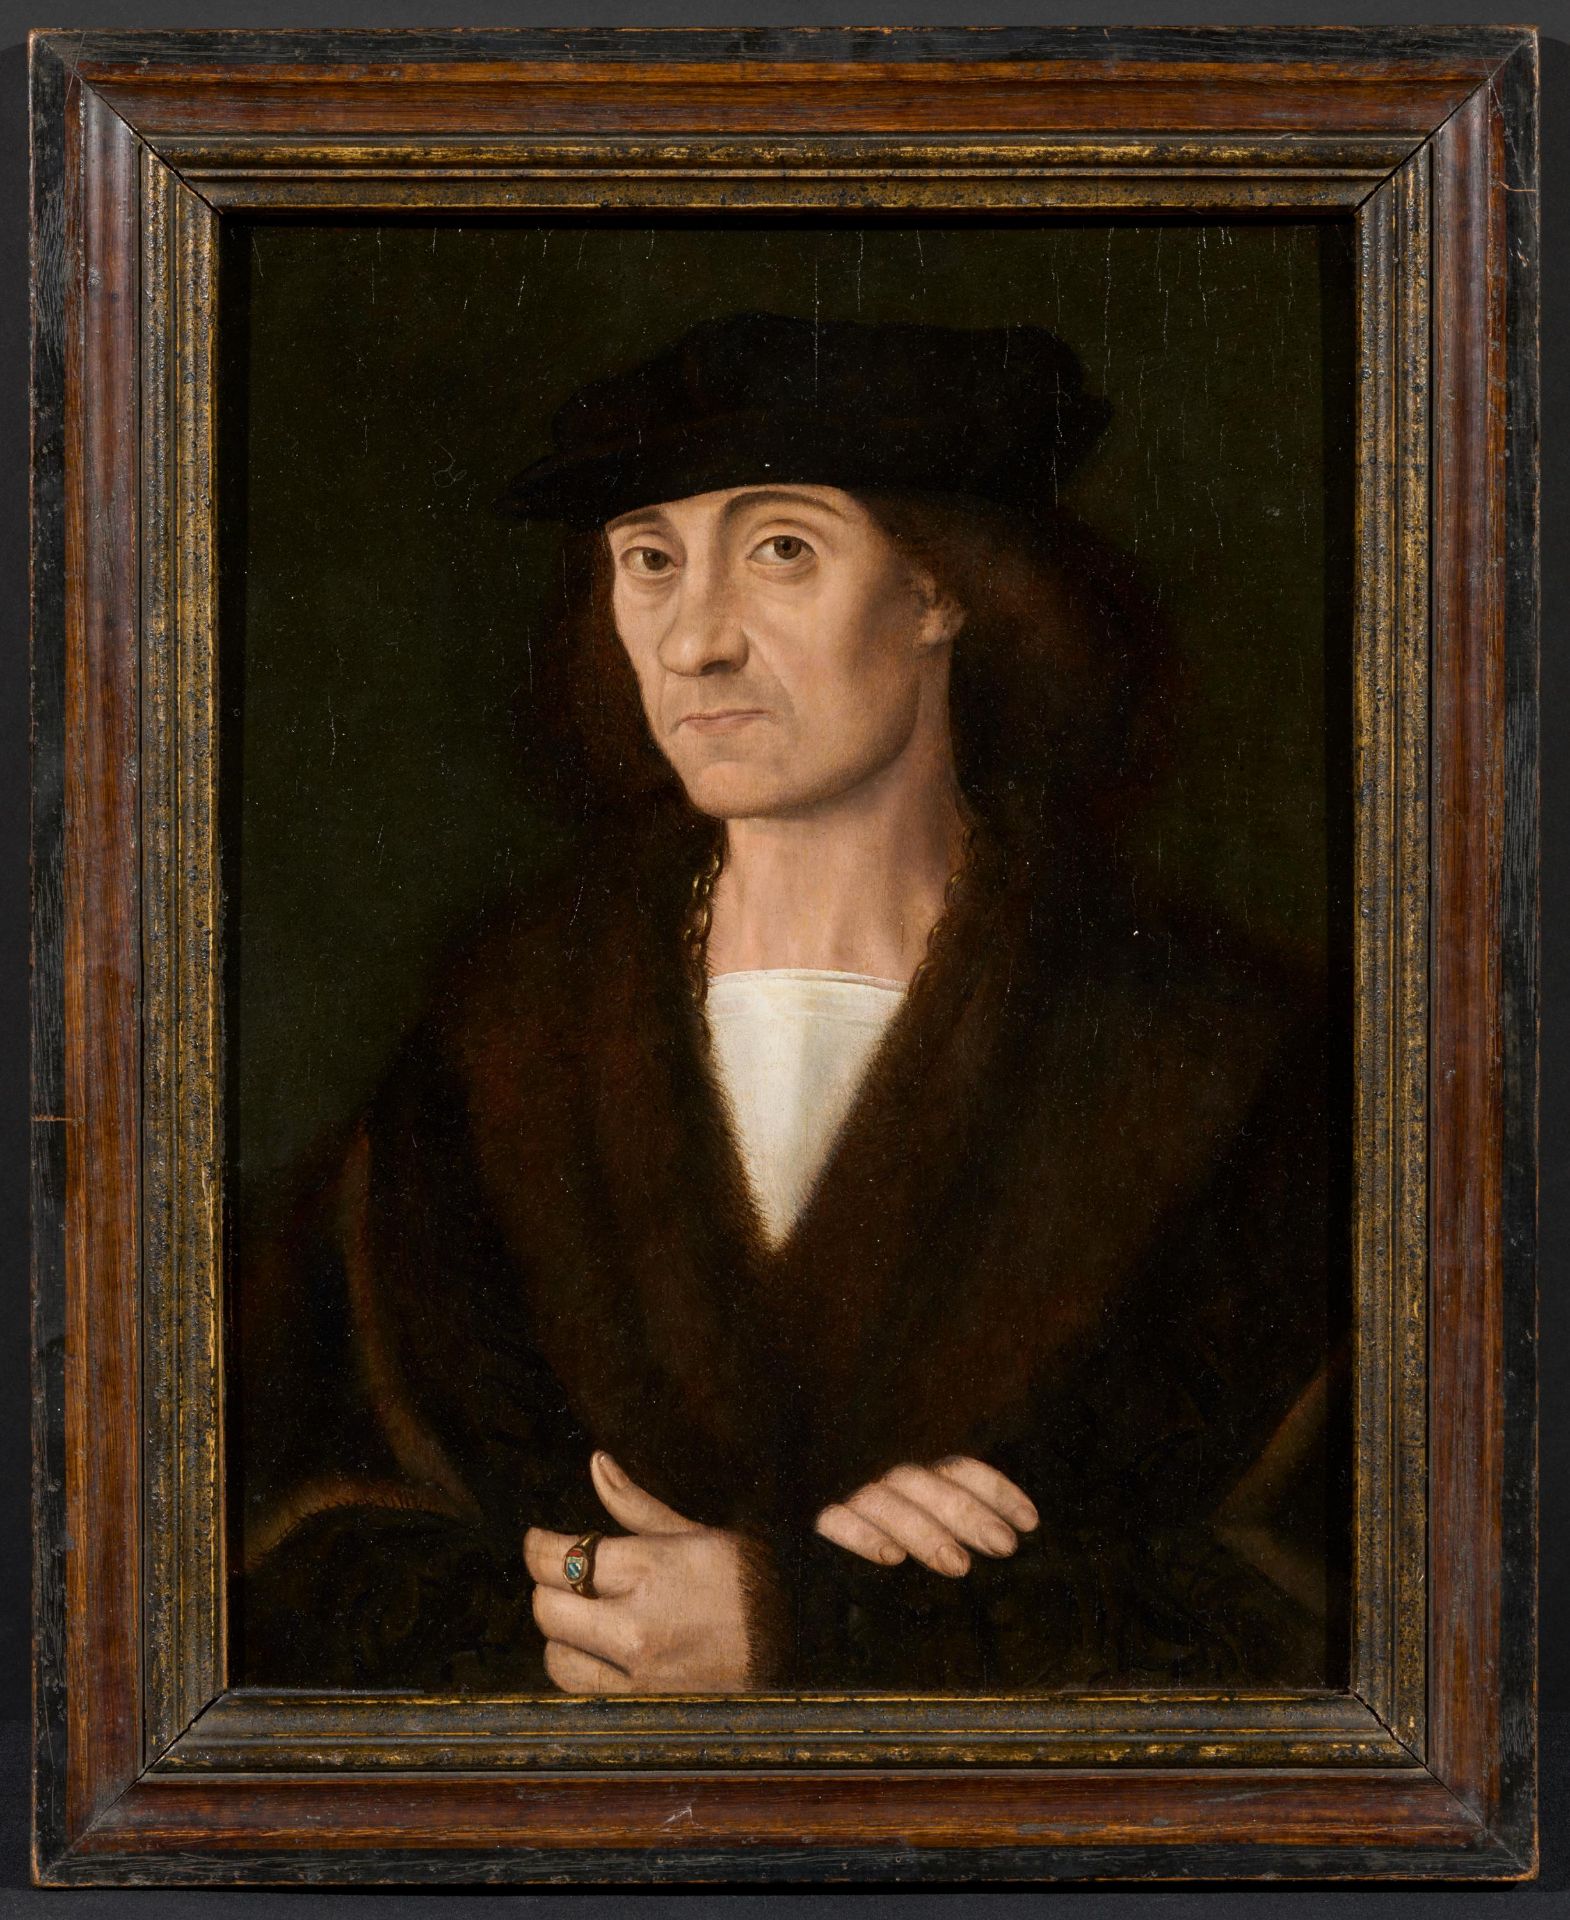 Hans Brosamer. Portrait of a Man with Fur Coat and Signet Ring - Image 2 of 4